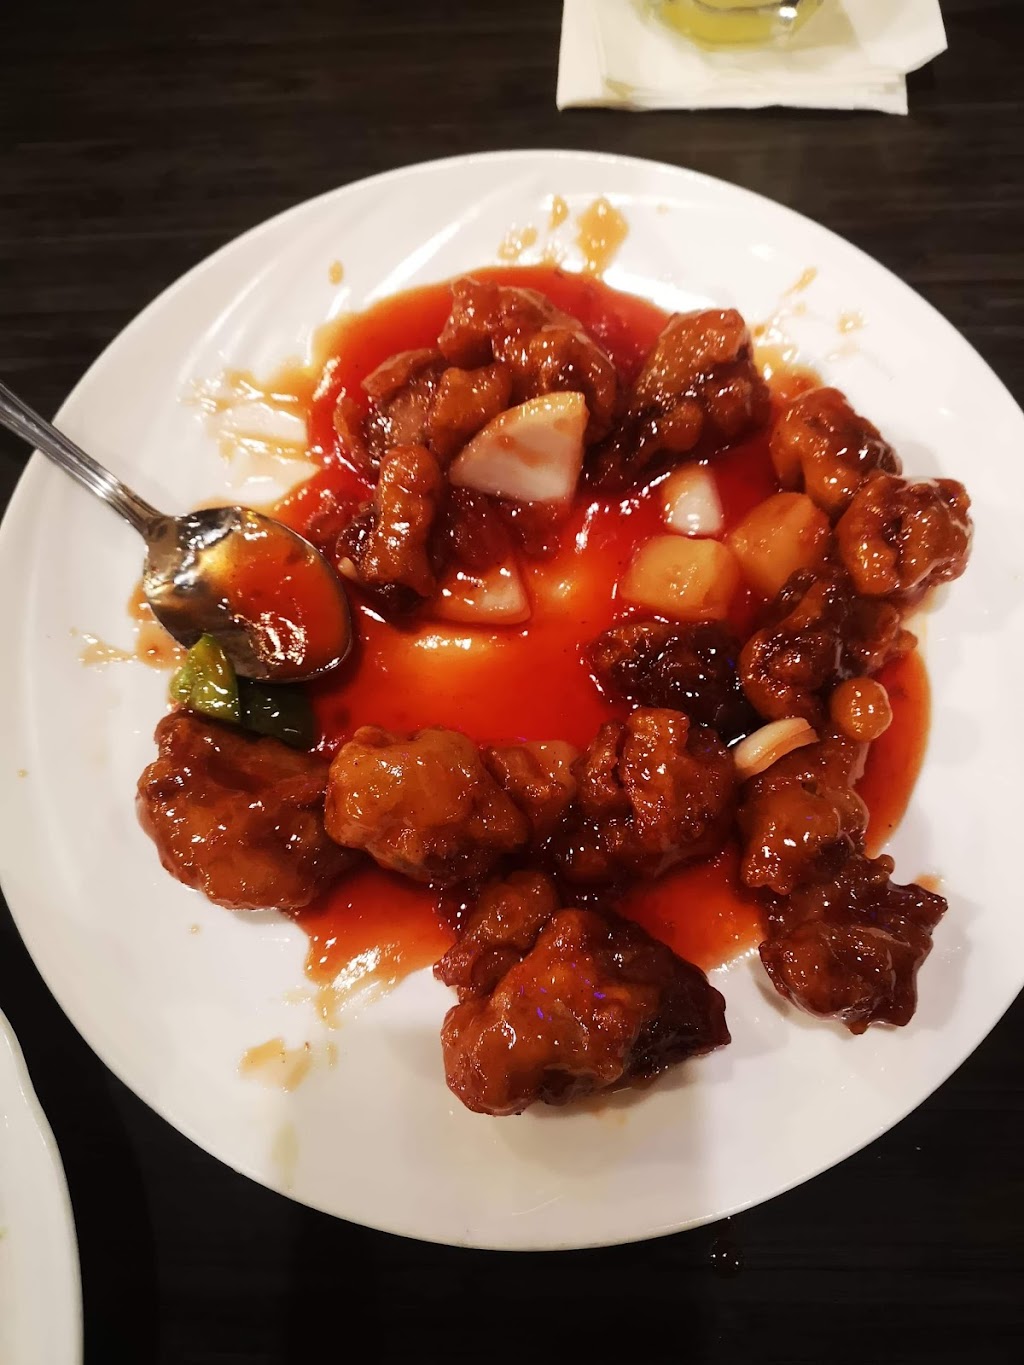 Red Star Chinese Restaurant | meal delivery | 3301 50 Ave, Red Deer, AB T4N 3Y2, Canada | 4033095566 OR +1 403-309-5566